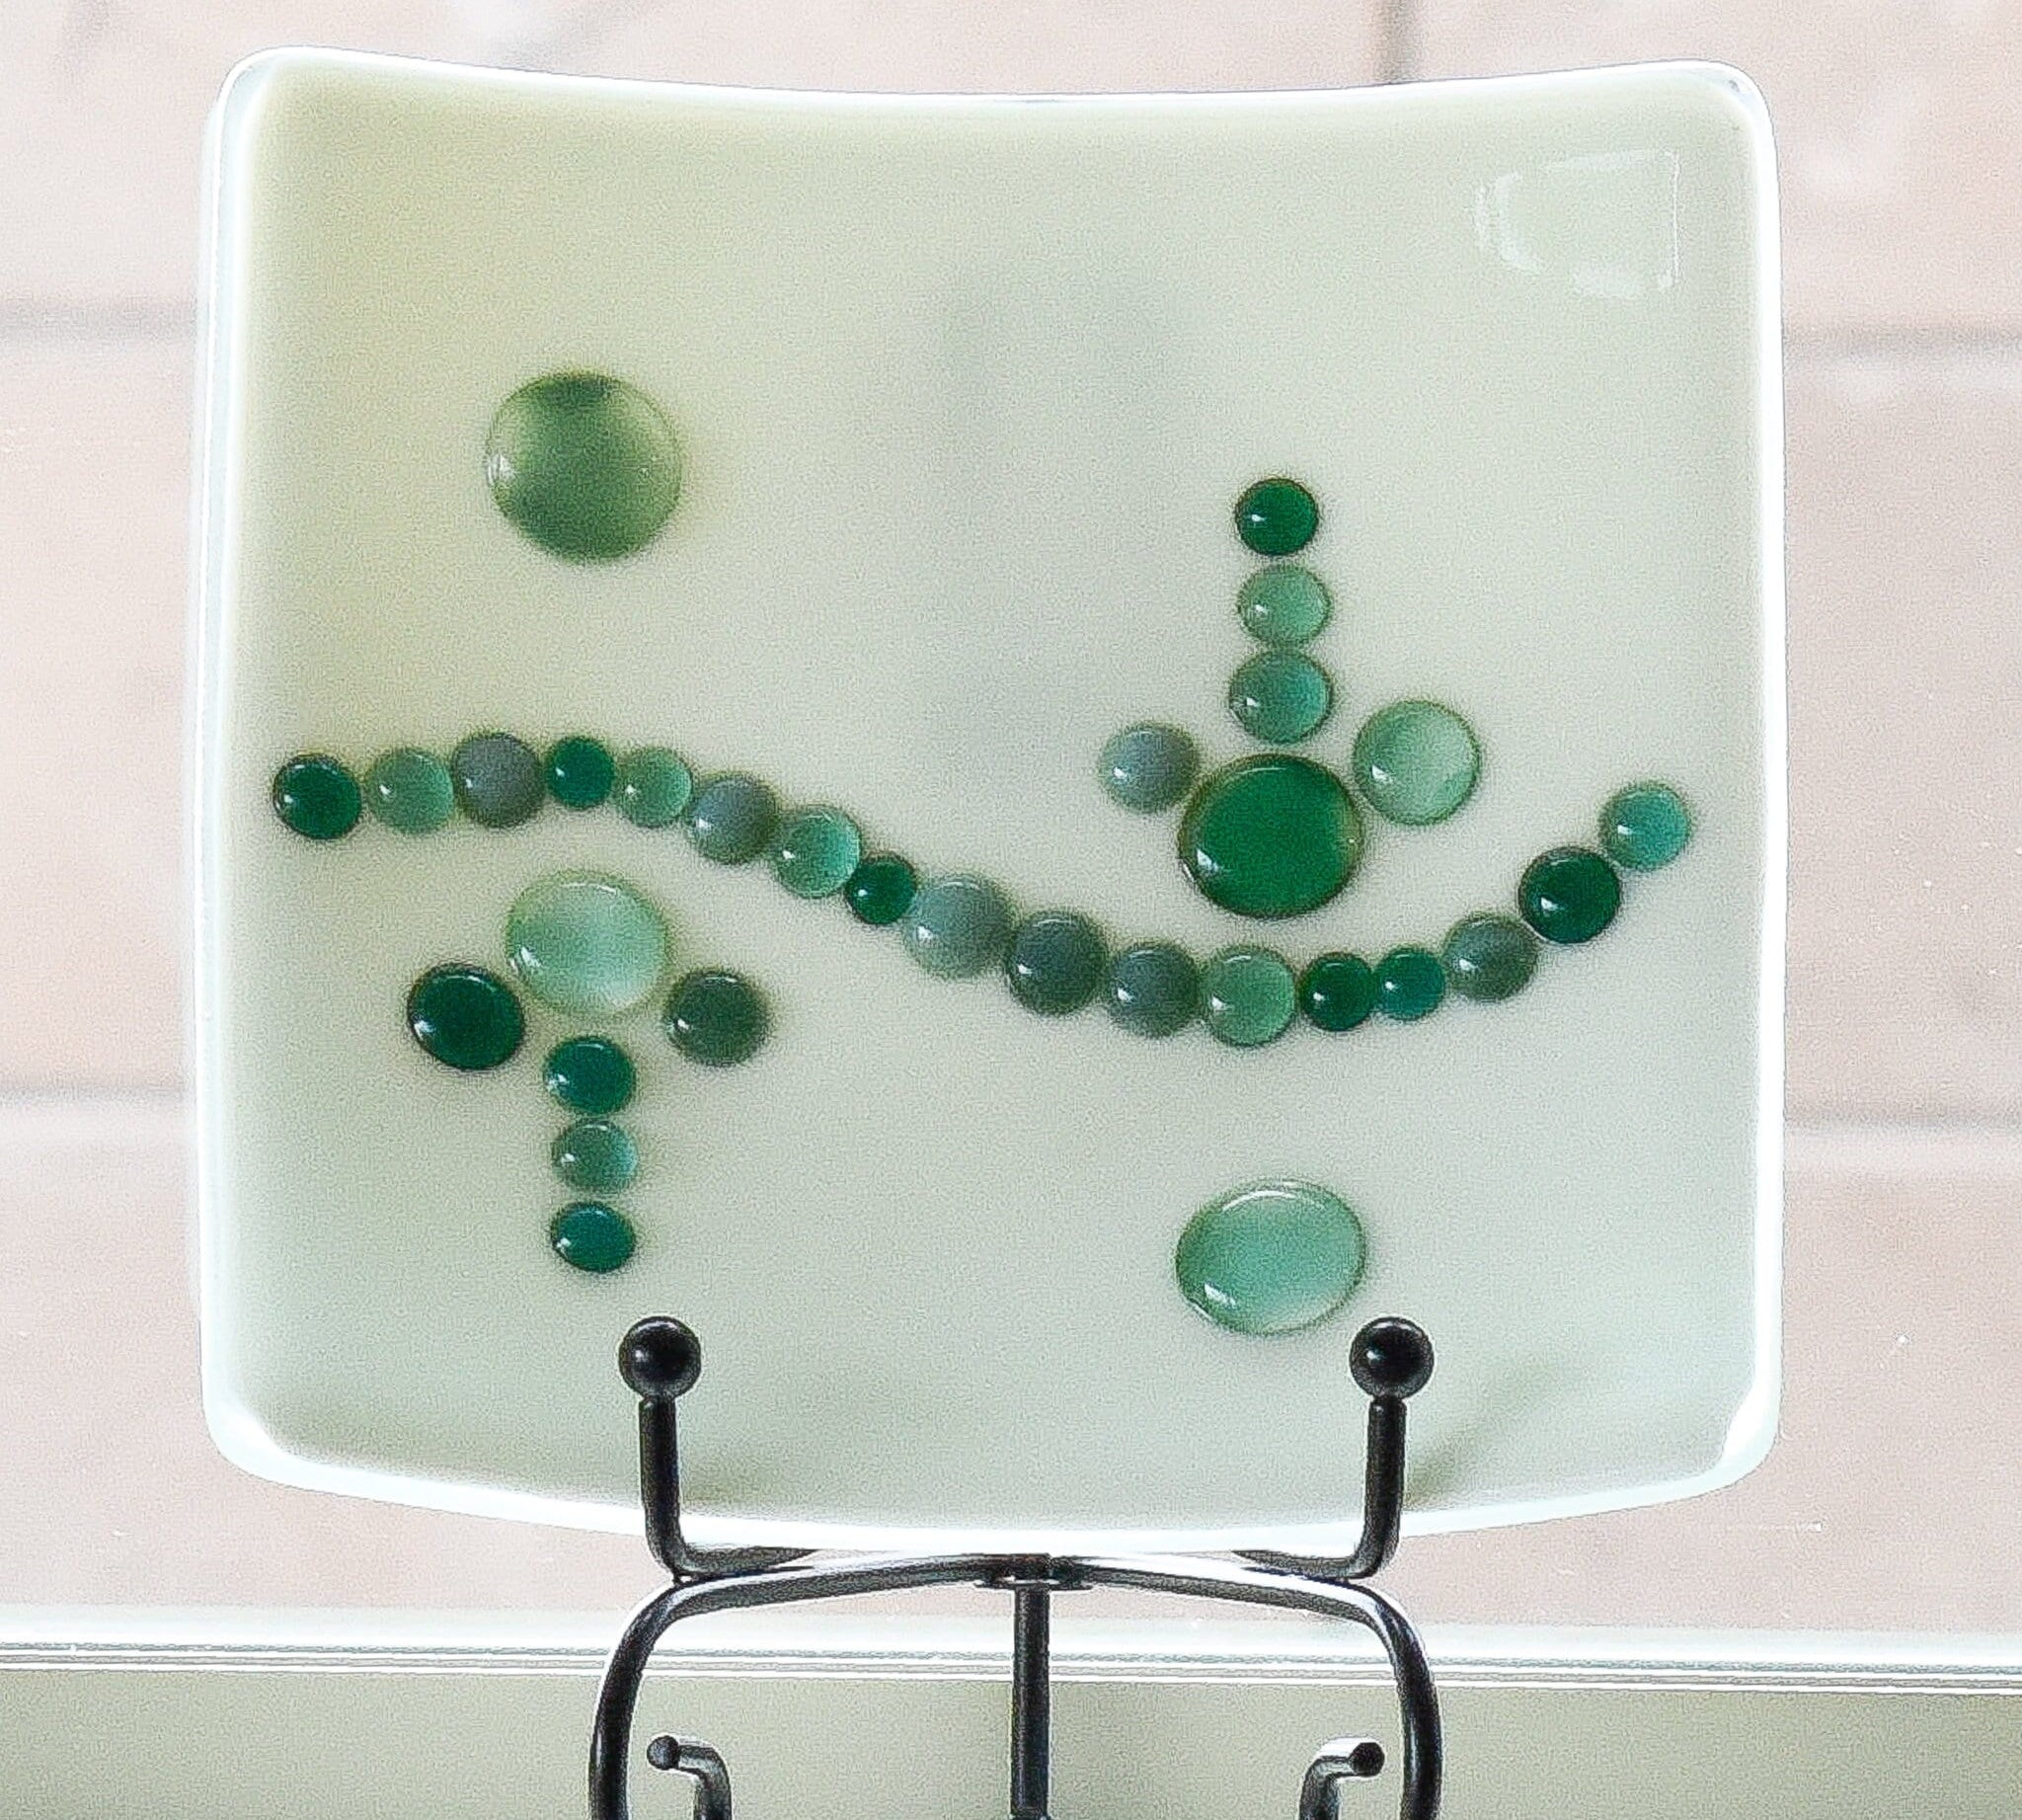 Small cream-colored square dish on stand in window. Dish has a wave-like design made with glass dots in various shades of green.